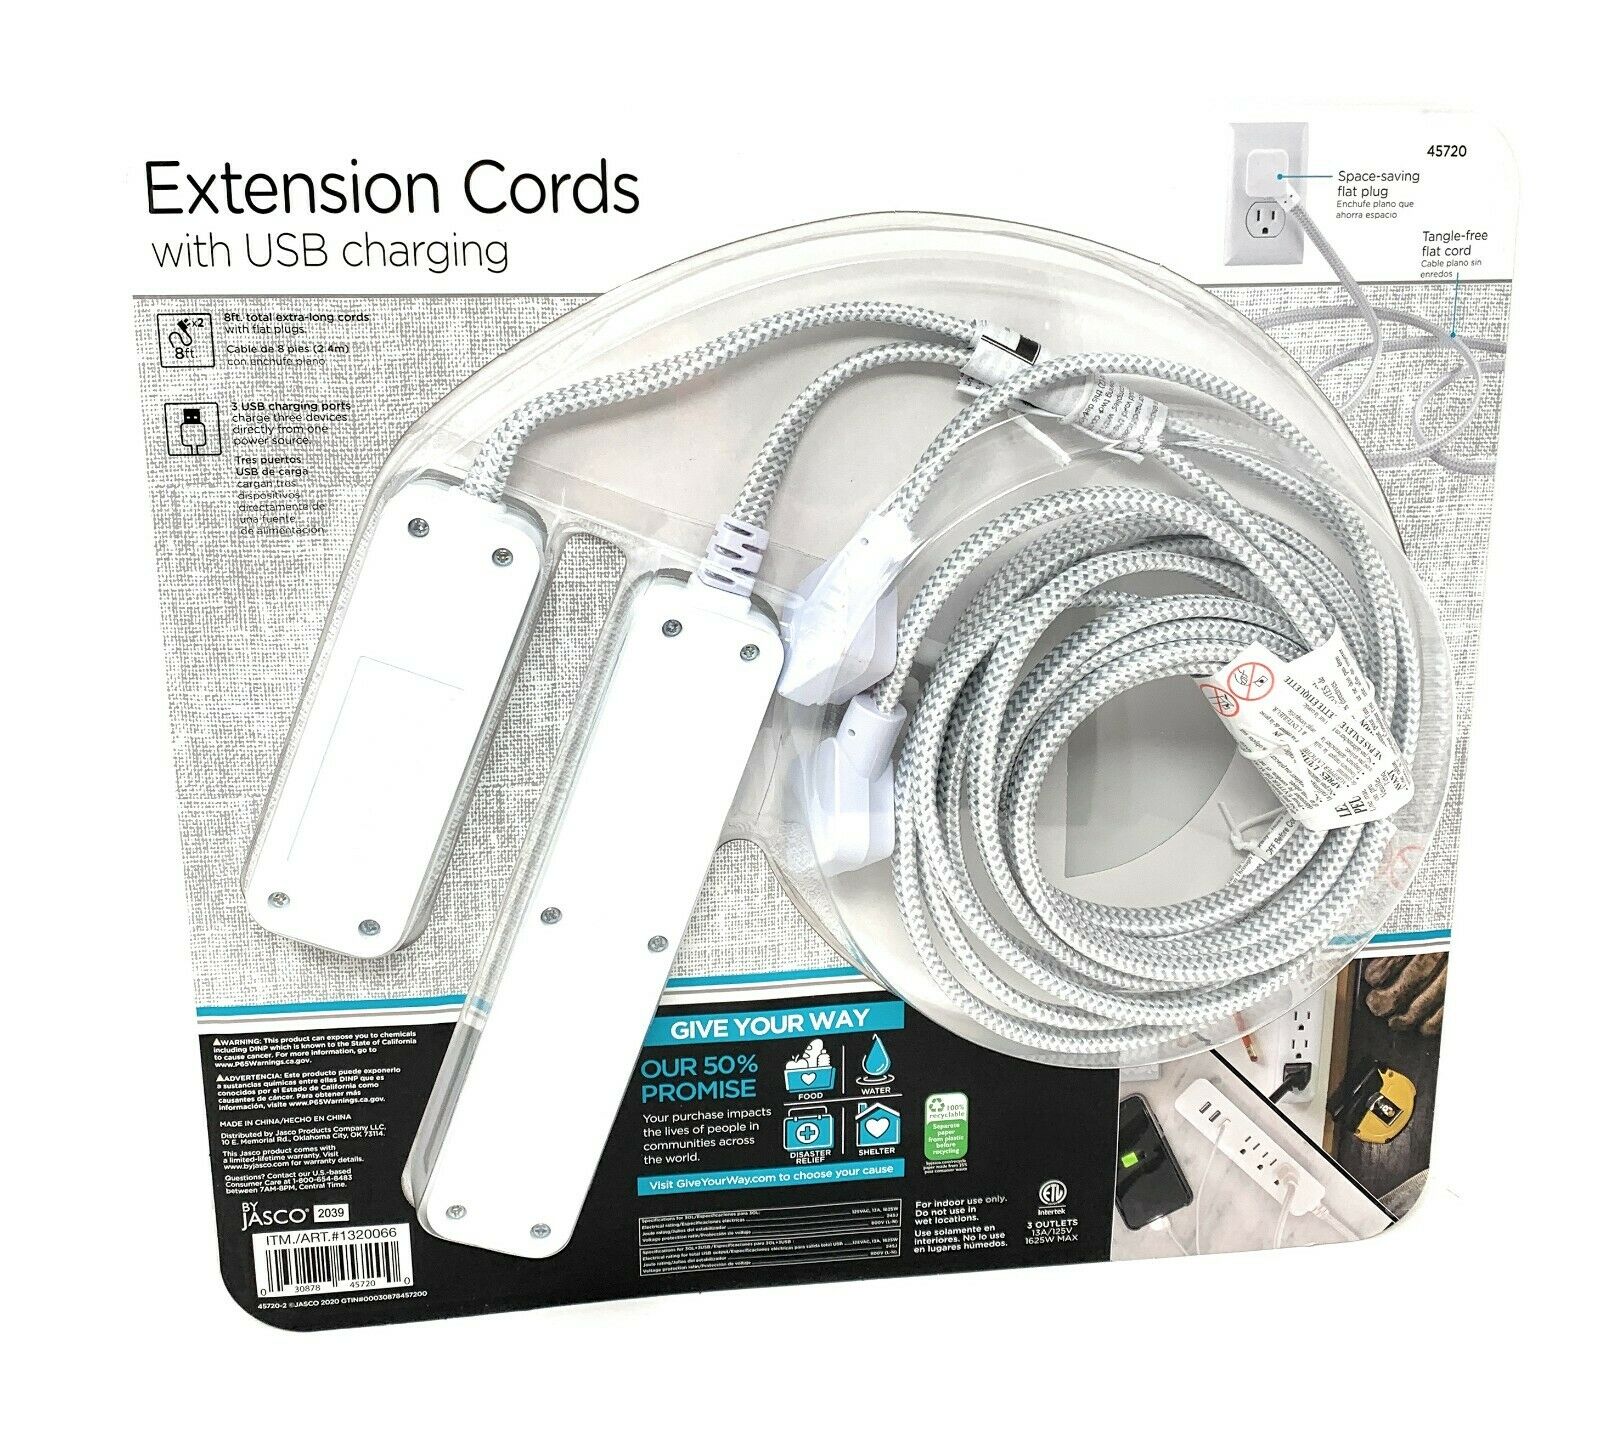 2-Pack Extension Cords with USB Fast Charging, 6 Outlets, 3 USB Ports, 3.4A, 8 ft Braided Extension Cords, Flat Plug, Dual Desktop Power Centers, ETL Listed, Gray/White, 45720 - UproMax